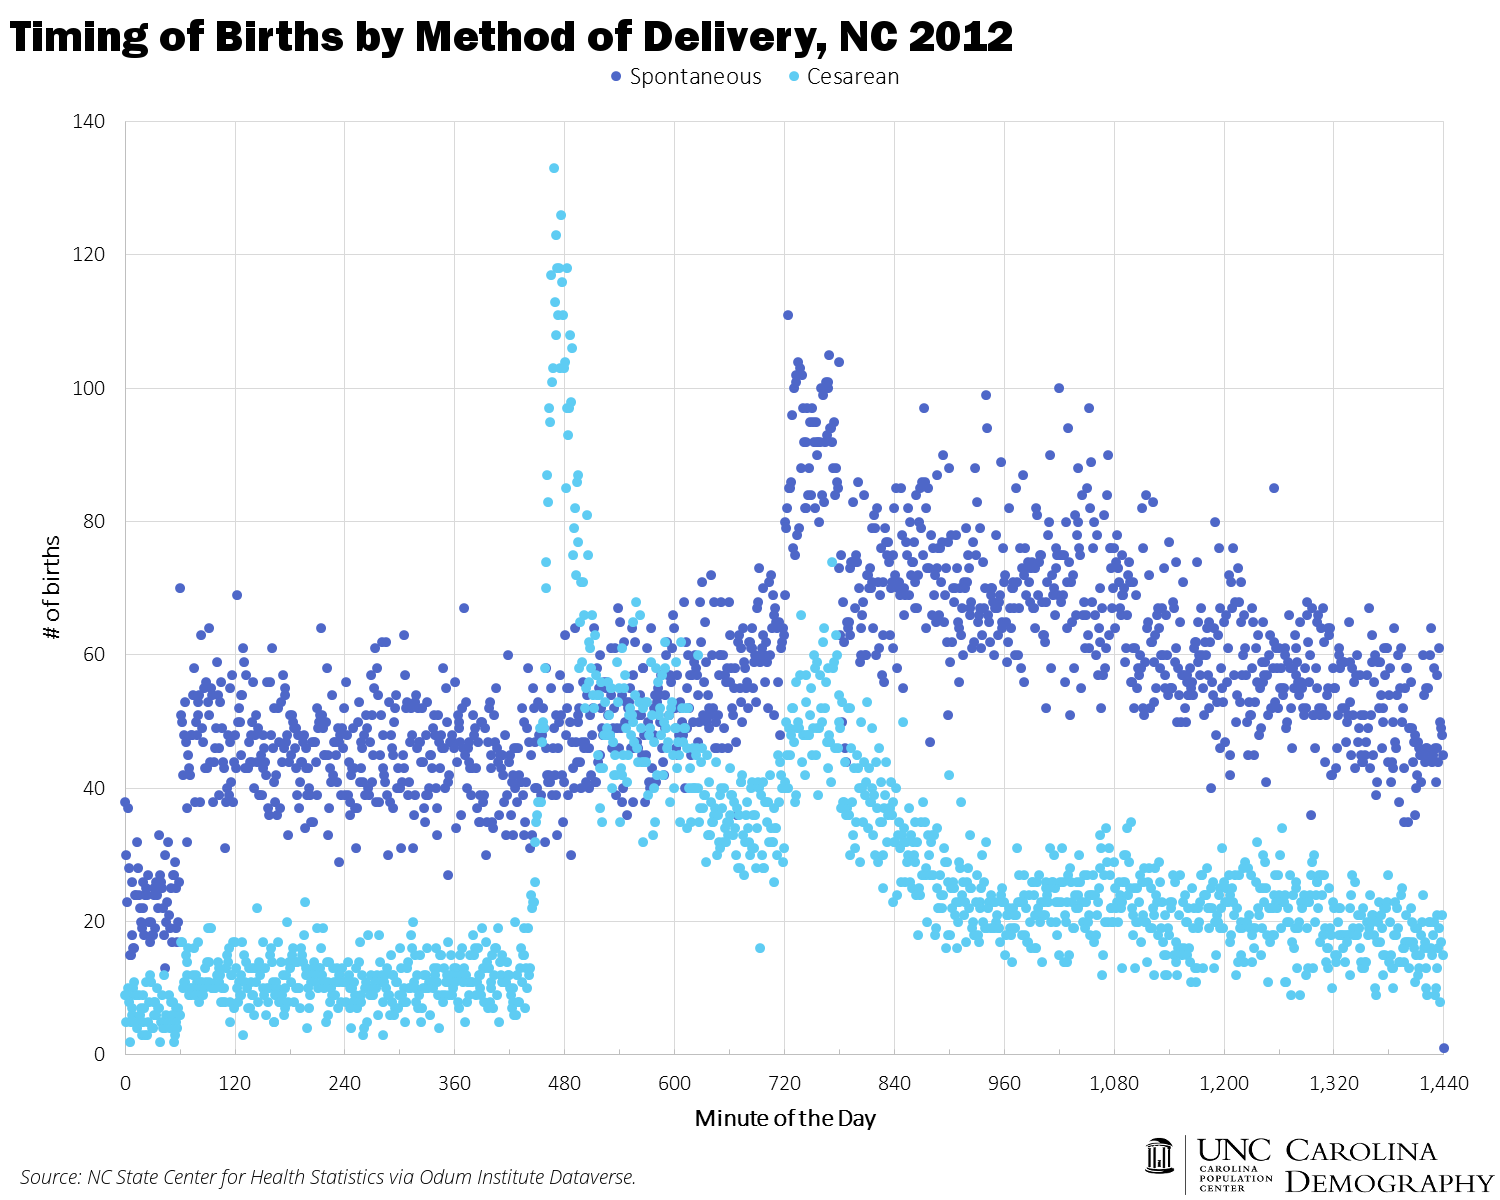 Timing of Birth by Method of Delivery NC 2012